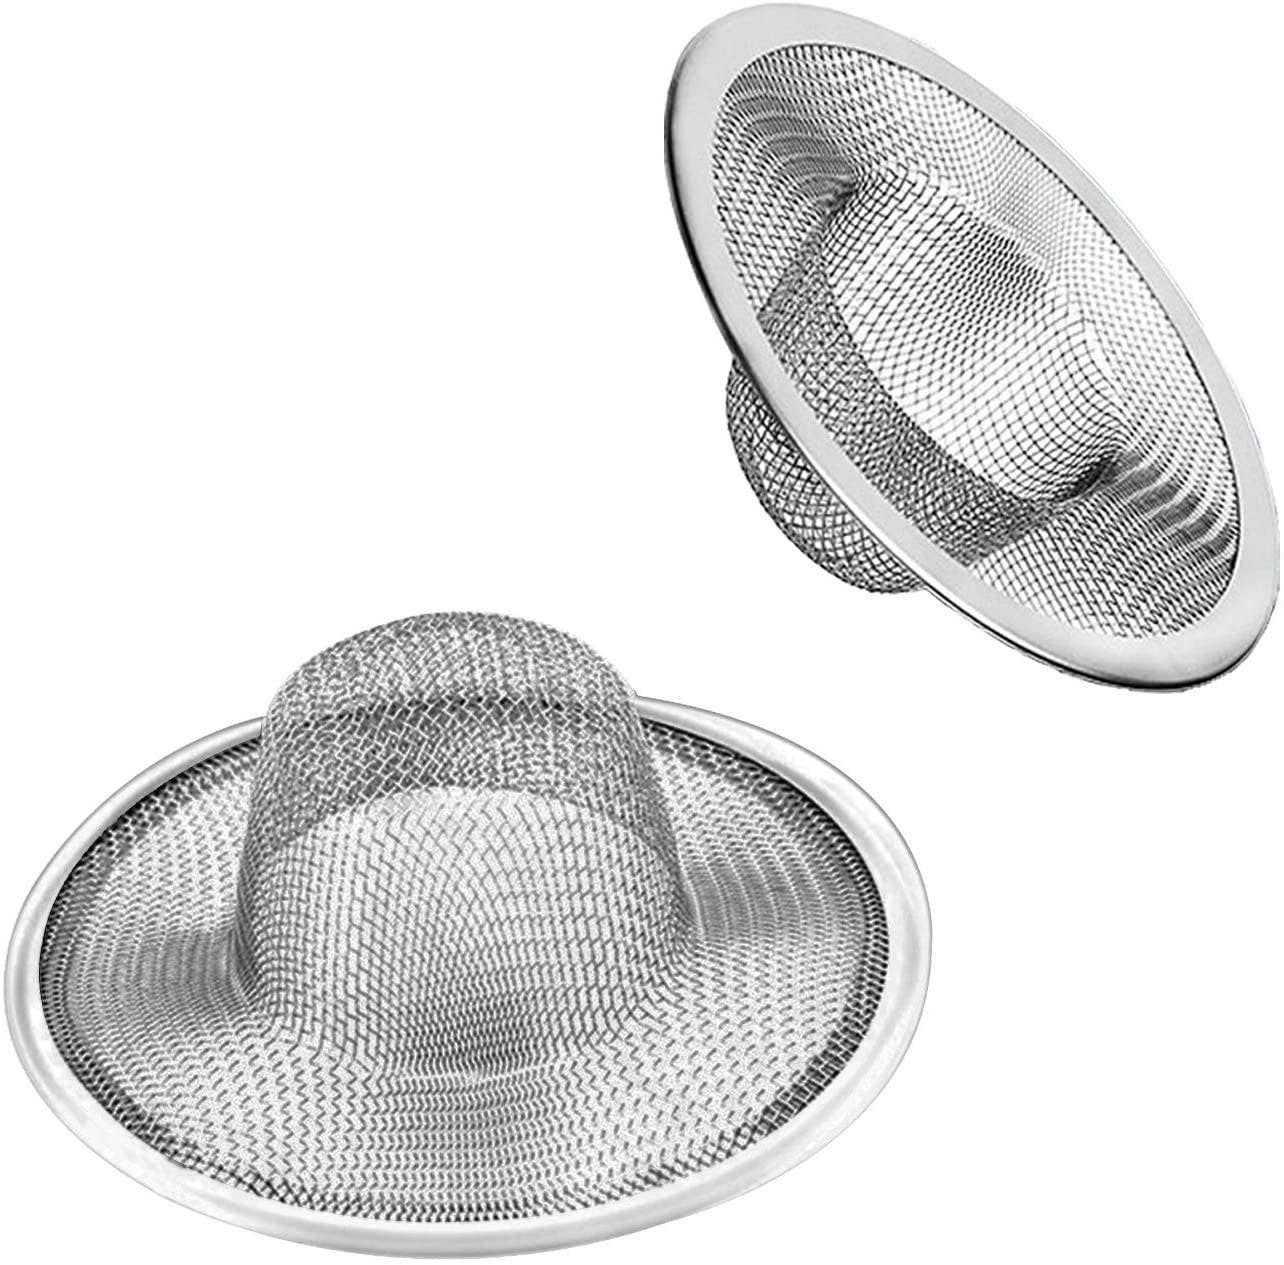 two drain strainers on a white background